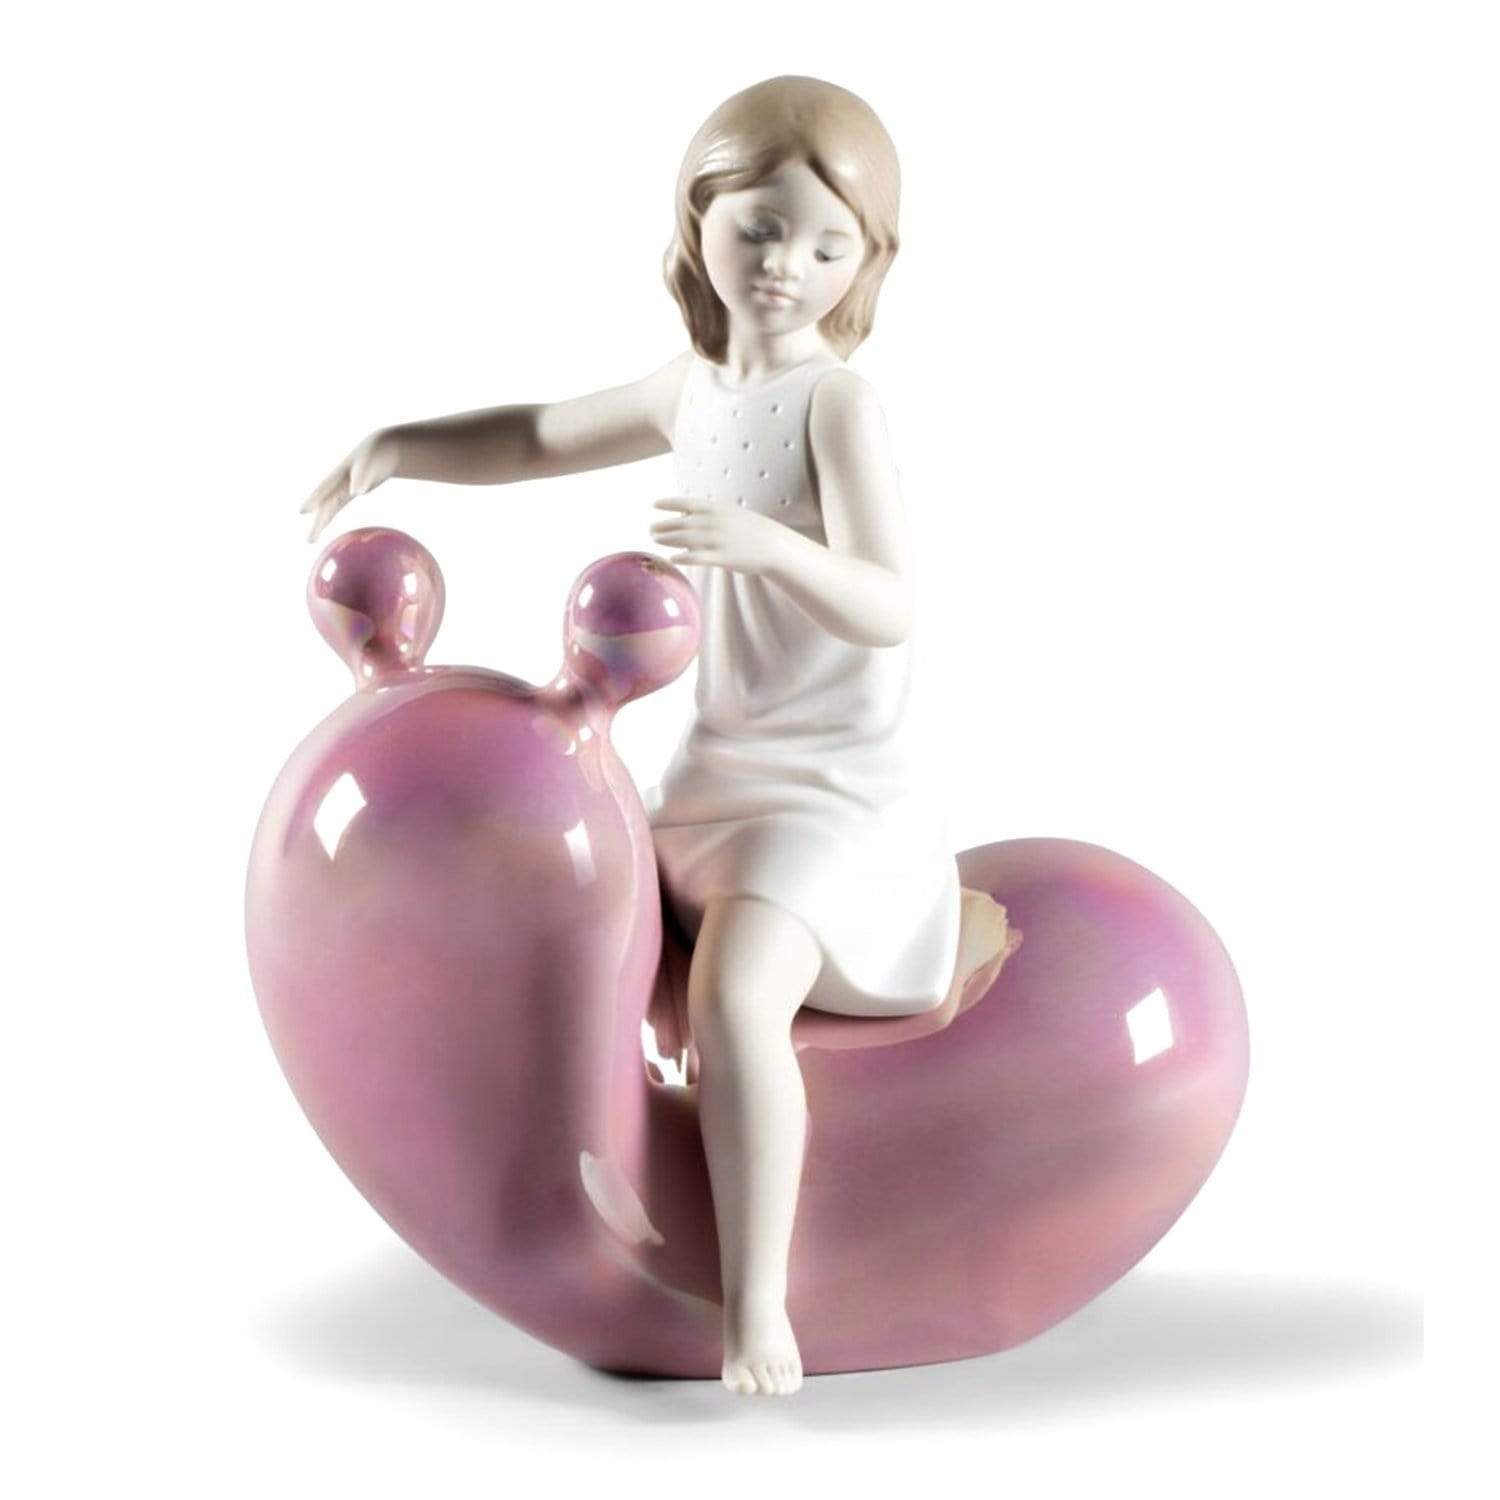 Lladro My Seesaw Balloon Girl Figurine - Pink and White - 1009367 - Jashanmal Home